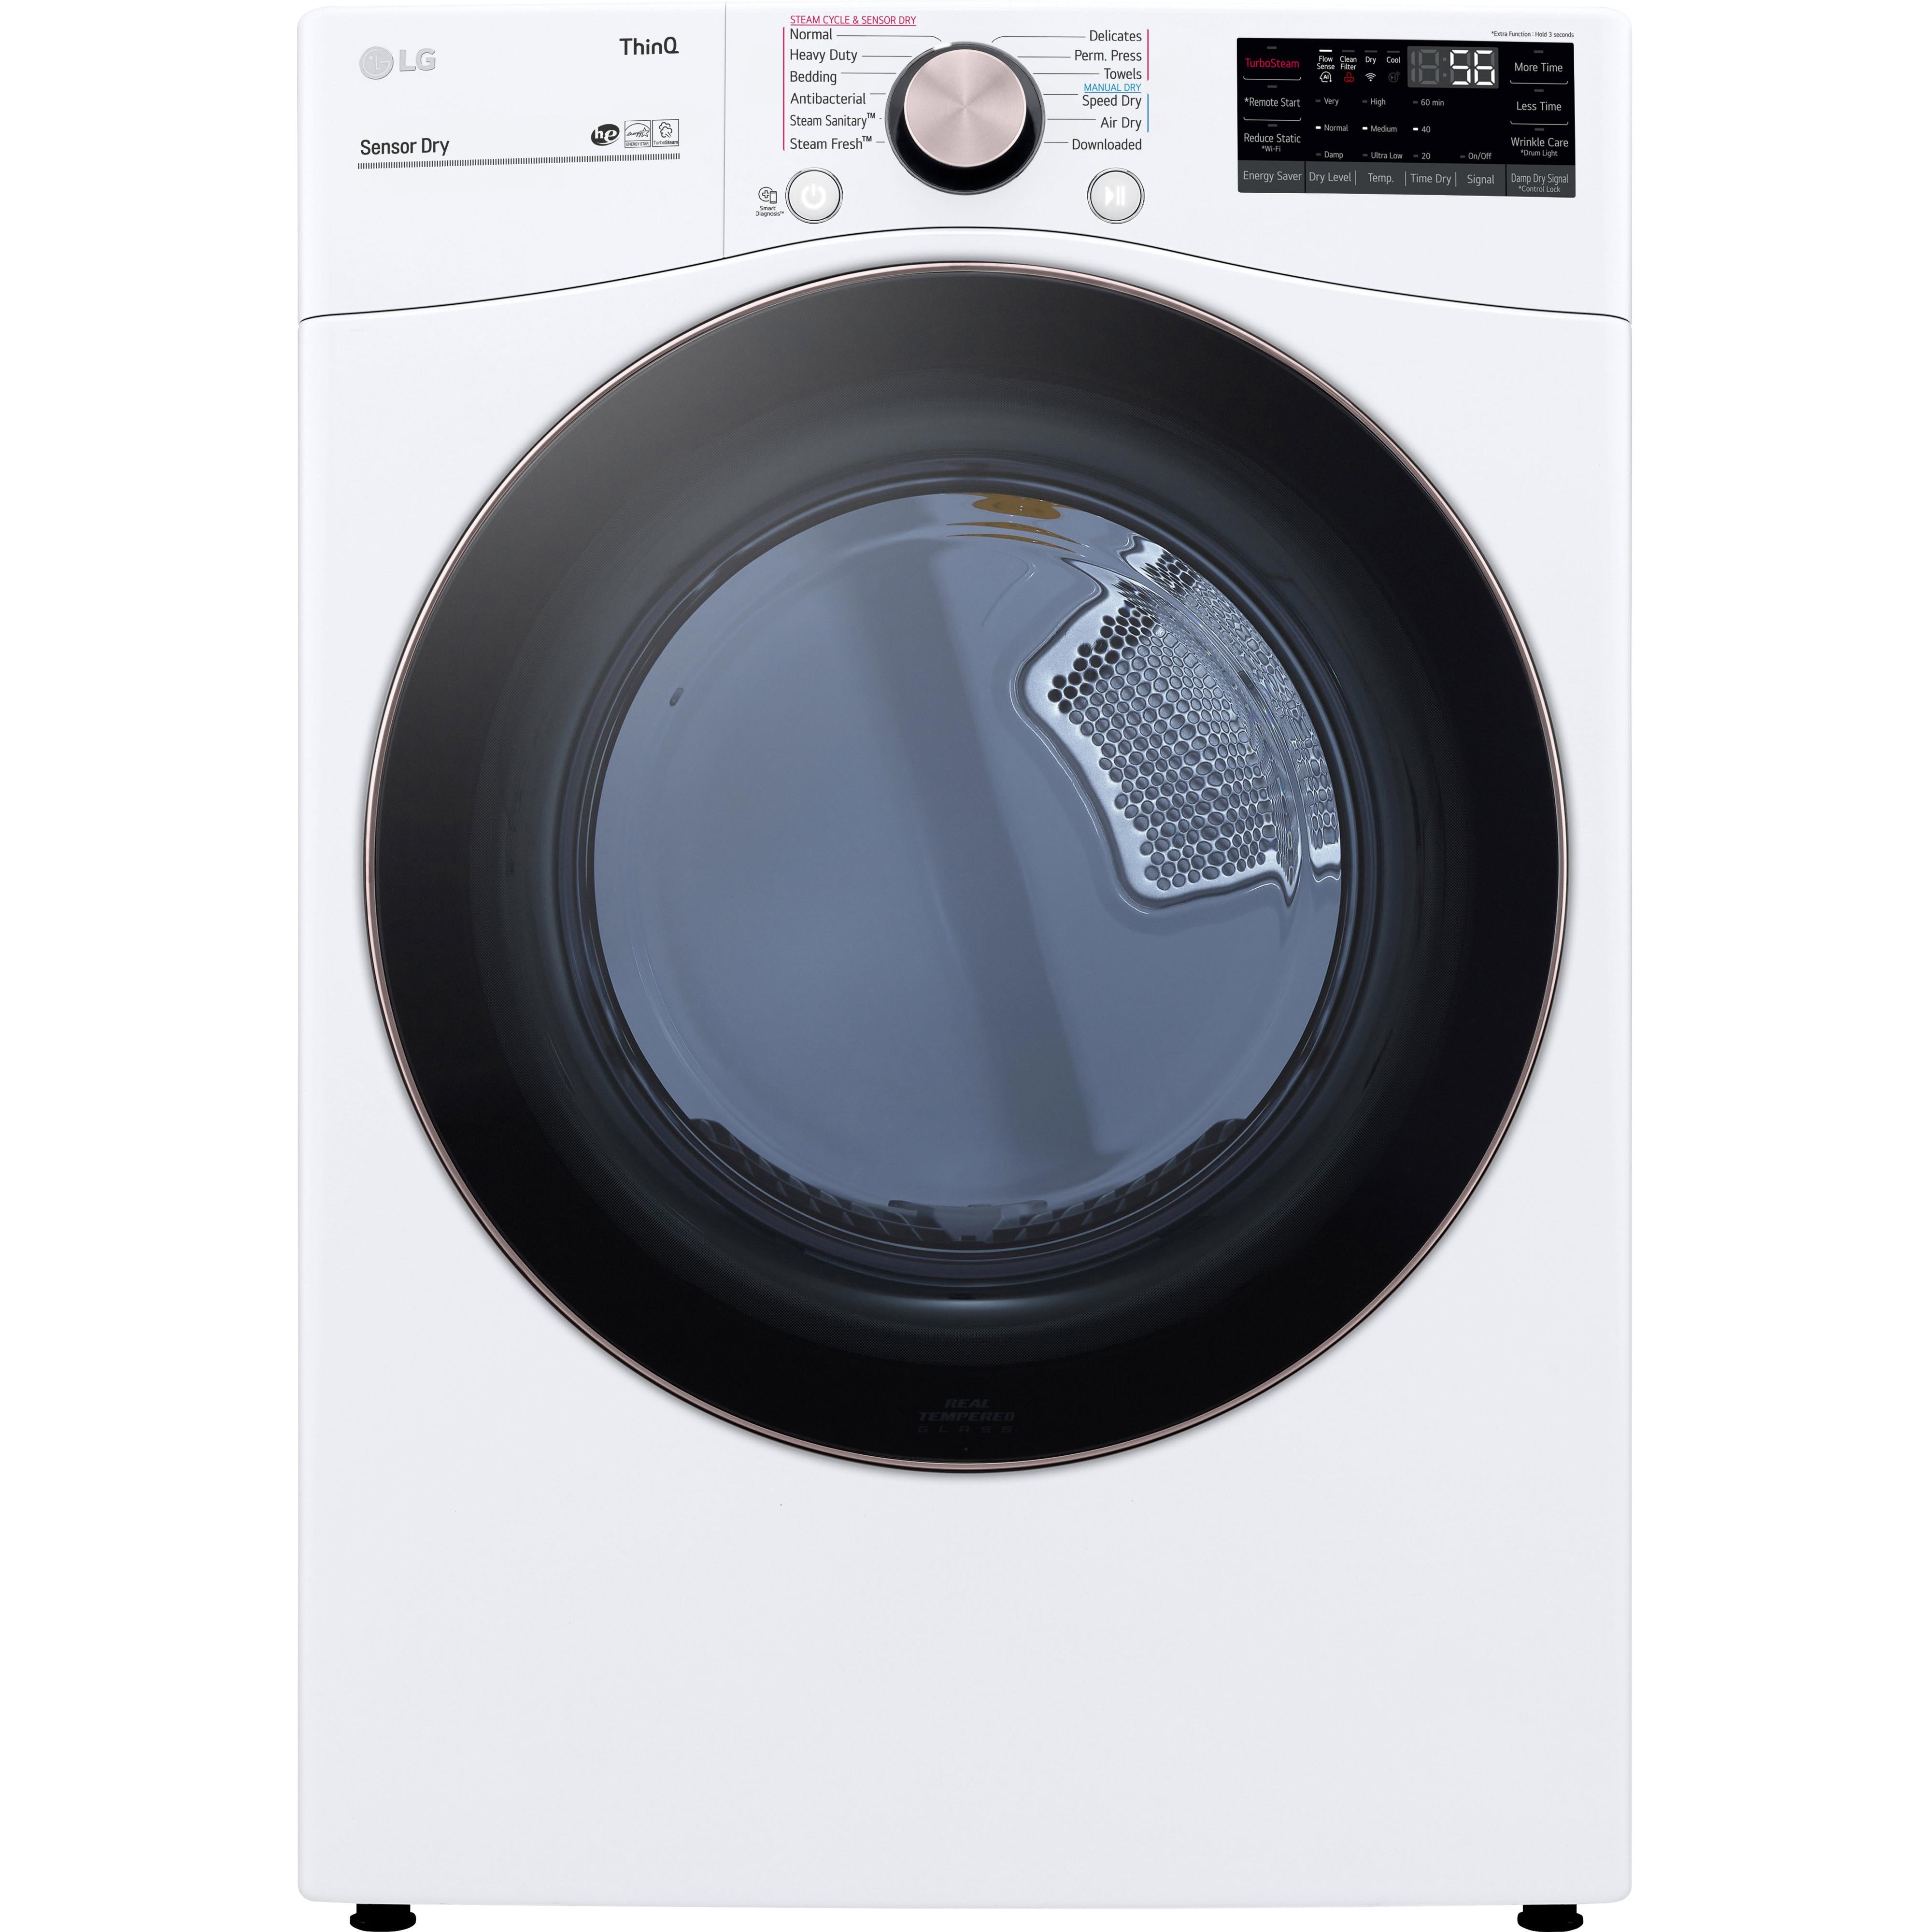 LG 7.4 cu.ft. Electric Dryer with TurboSteam? Technology DLEX4000W